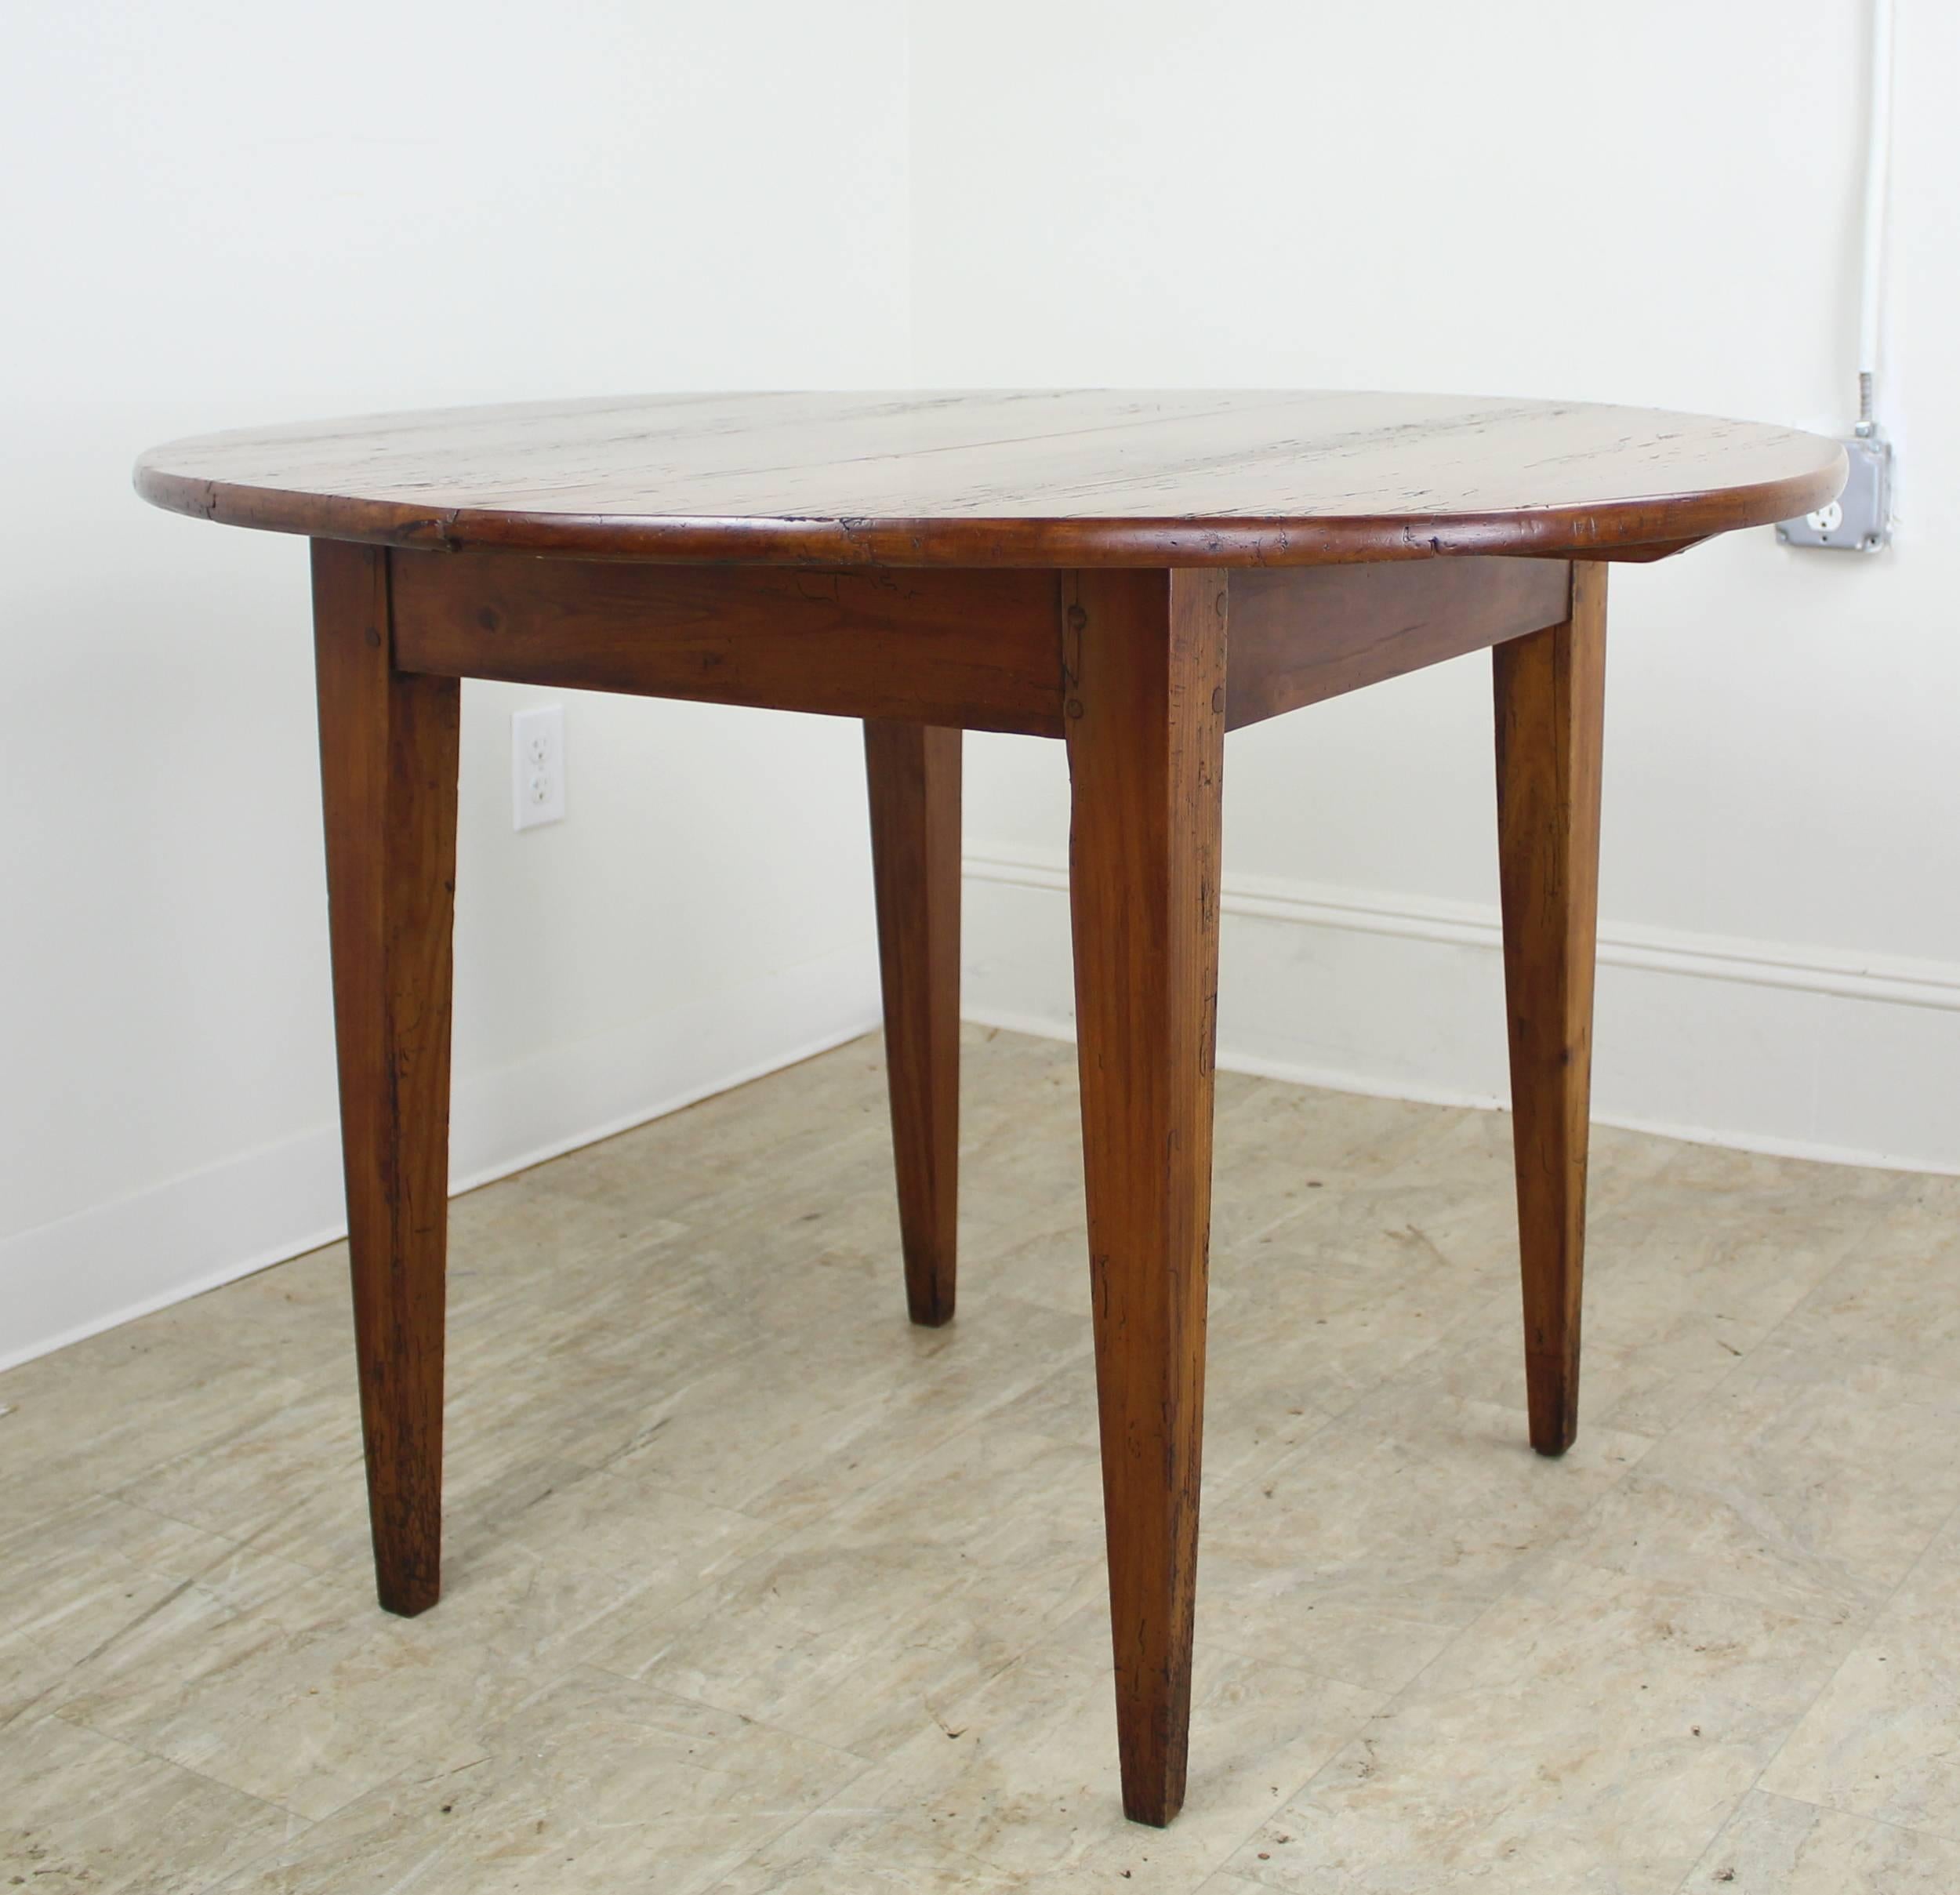 An antique thick topped breakfast farm table from France. Made of cherry with a rich color and patina, with areas of moderate distress. A good-sized breakfast table. Very good for small dining table. Lovely farm table tapered legs. Note that the top